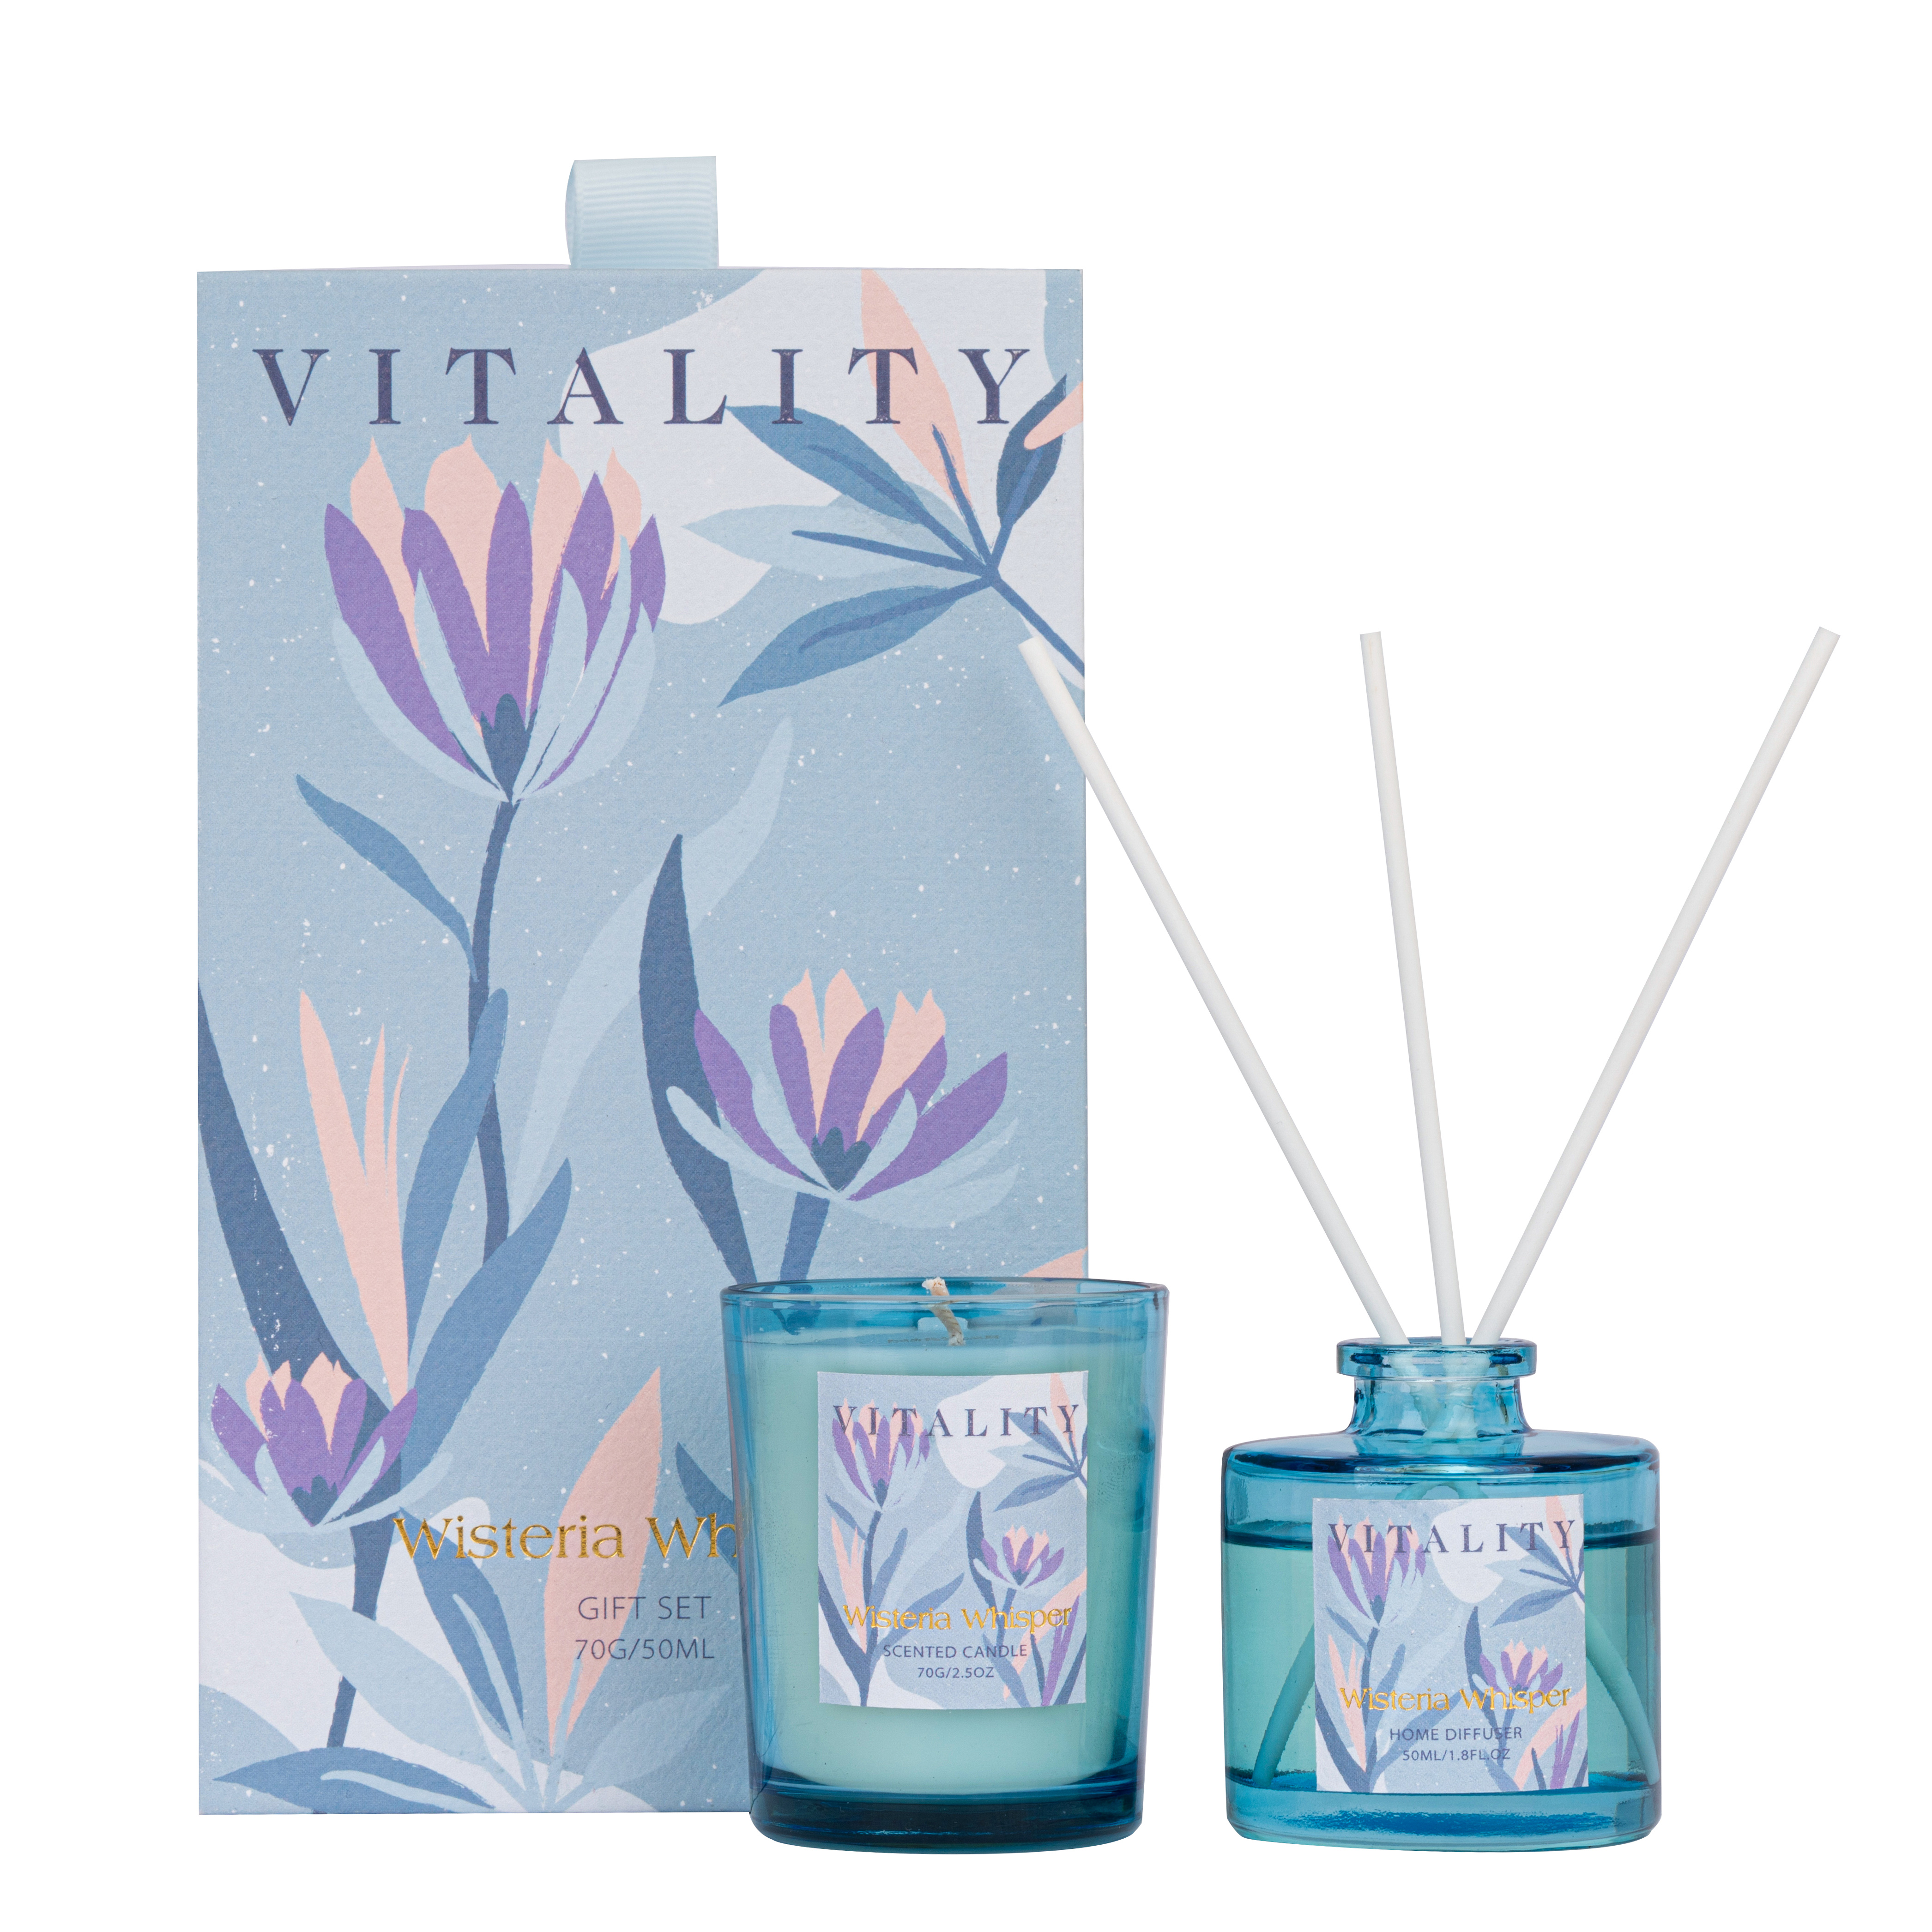 KNIT&WOVE Collection Wisteria Whisper 70g/50ml Blue Scented Candle And Blue Reed Diffuser 